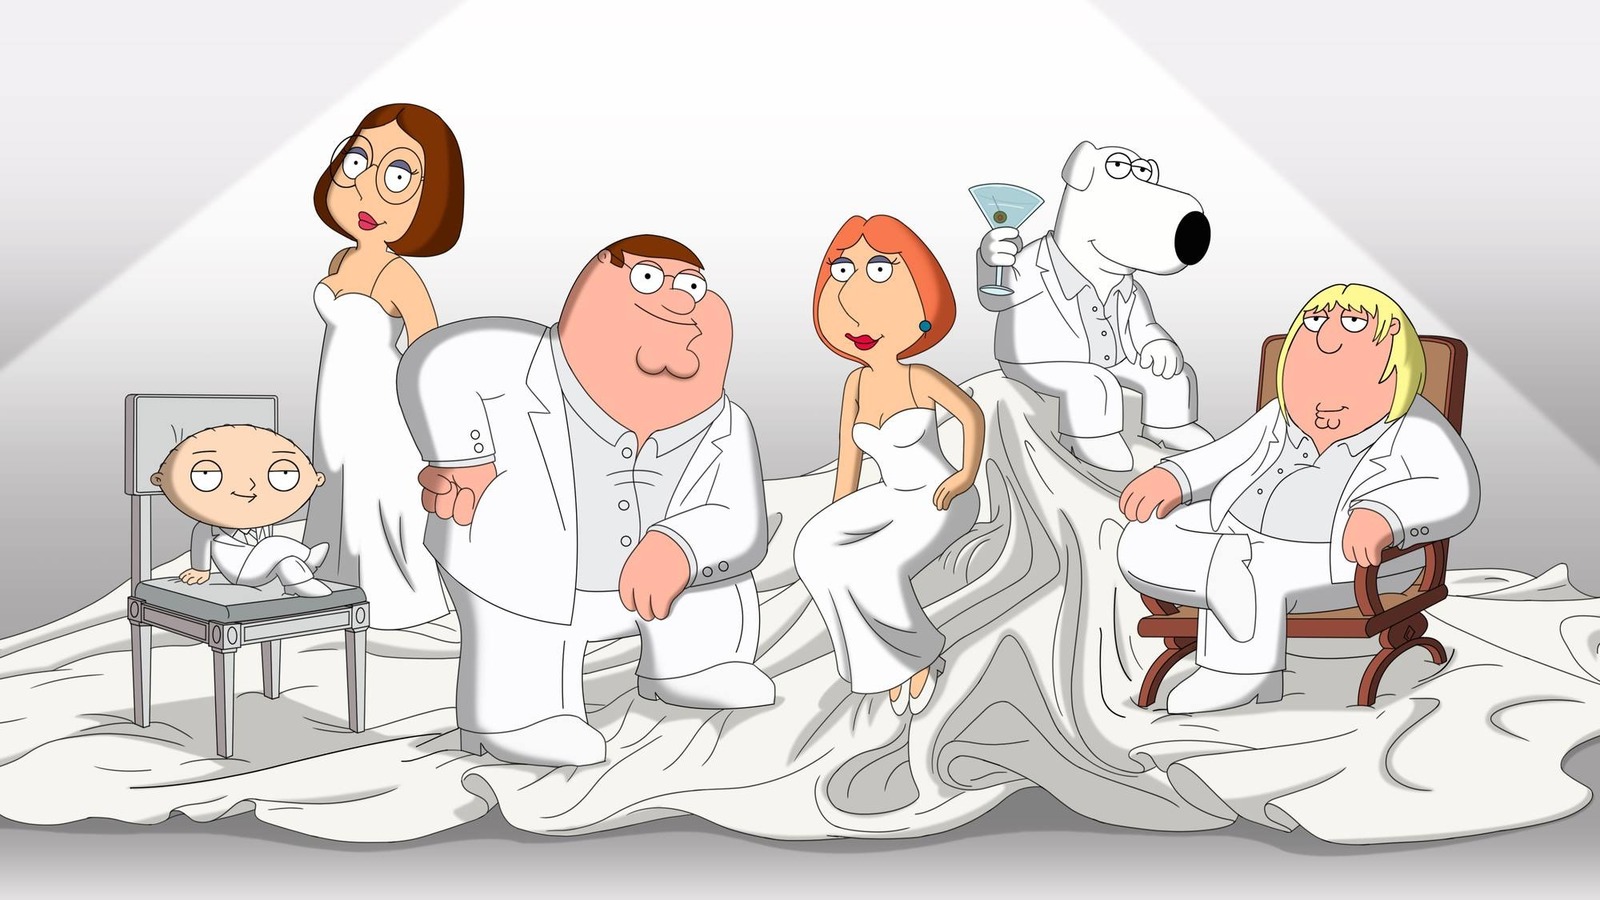 Family Guy Creator Seth MacFarlane Won't End The Show Until Audiences
Stop Caring